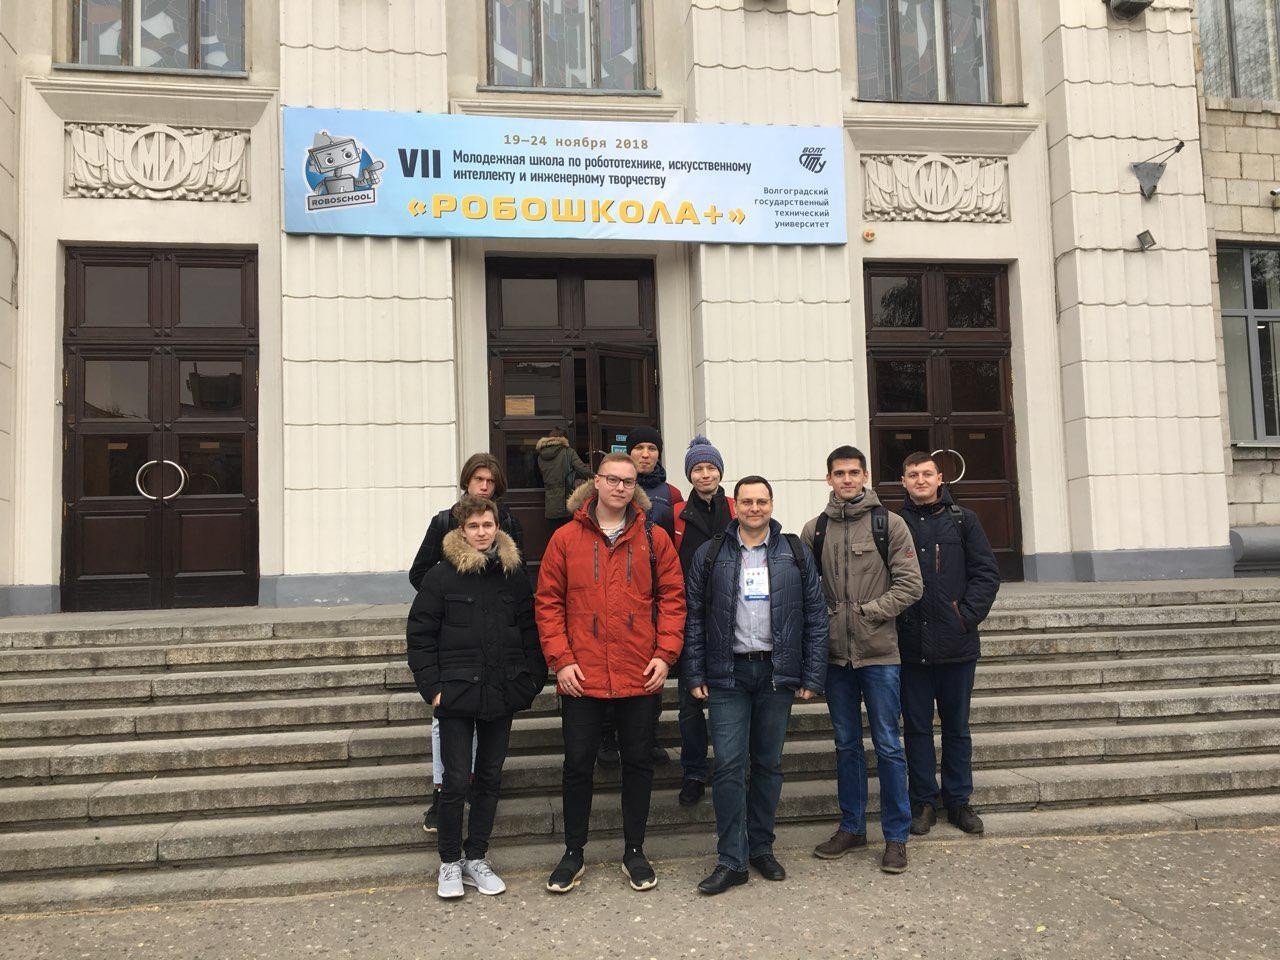 Students of the Laboratory of intelligent robotic systems participated at the VII Youth School on Robotics, Artificial Intelligence and Engineering Creativity 'Roboschool+'